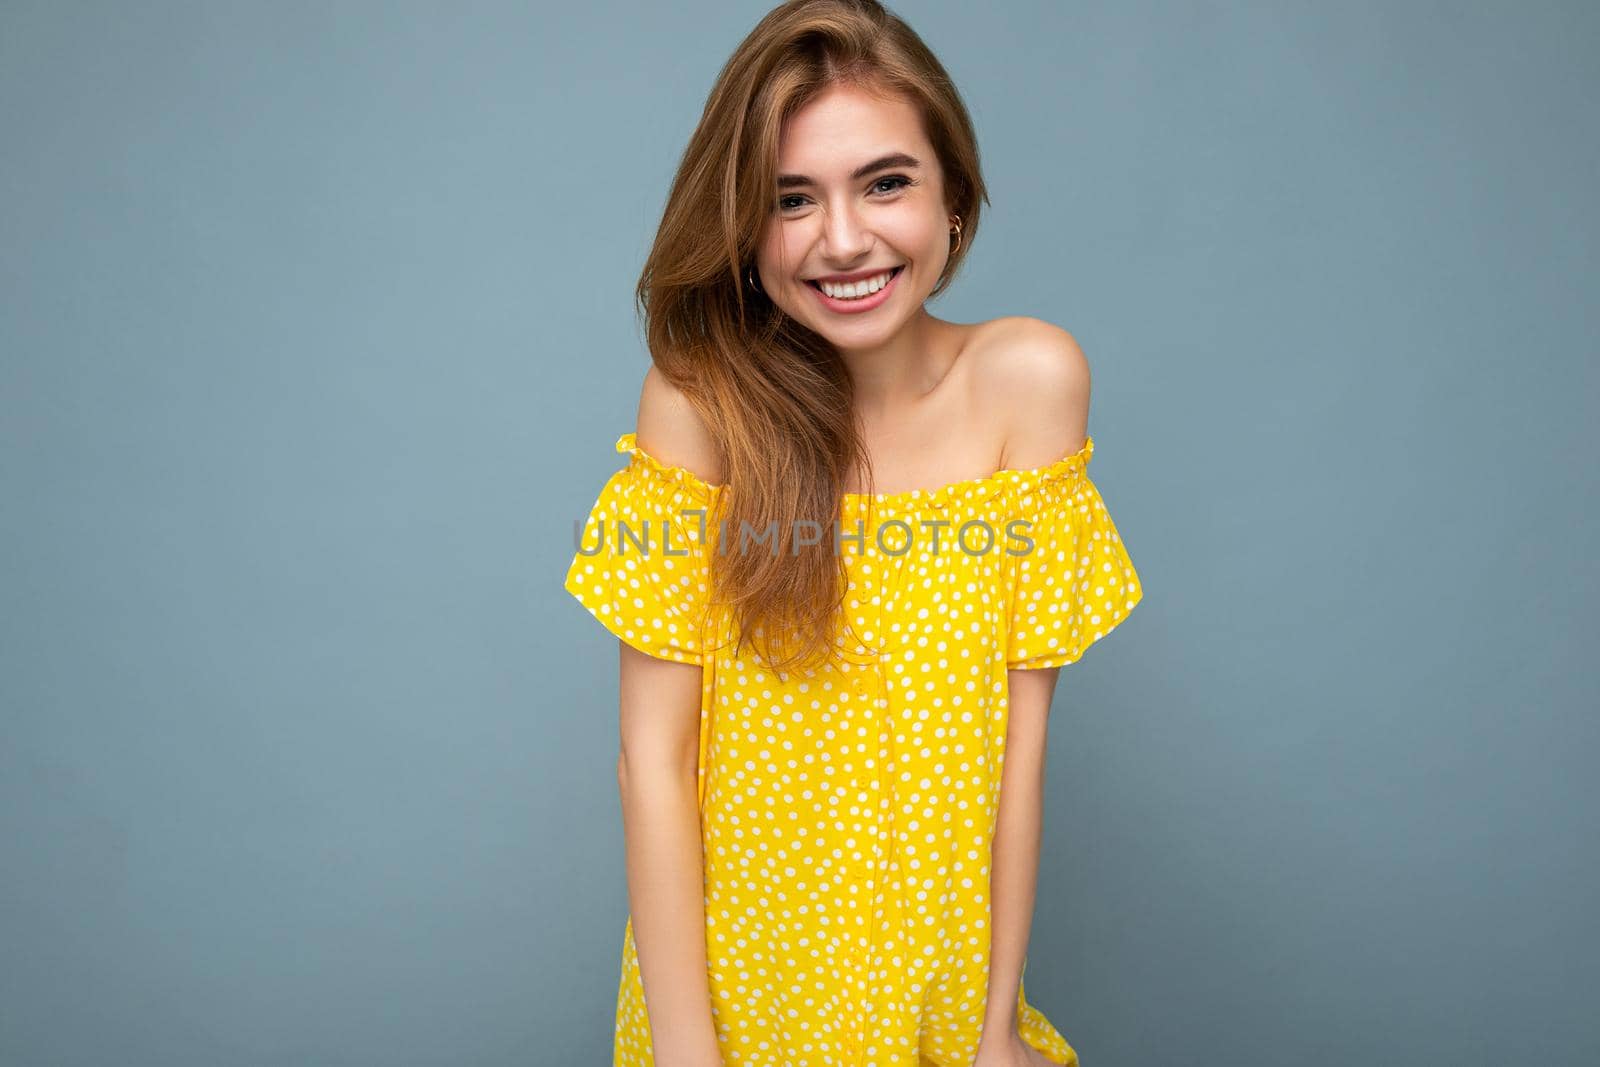 Photo of beautiful positive smiling adult woman wearing stylish clothes standing isolated on colorful background with copy space looking at camera by TRMK